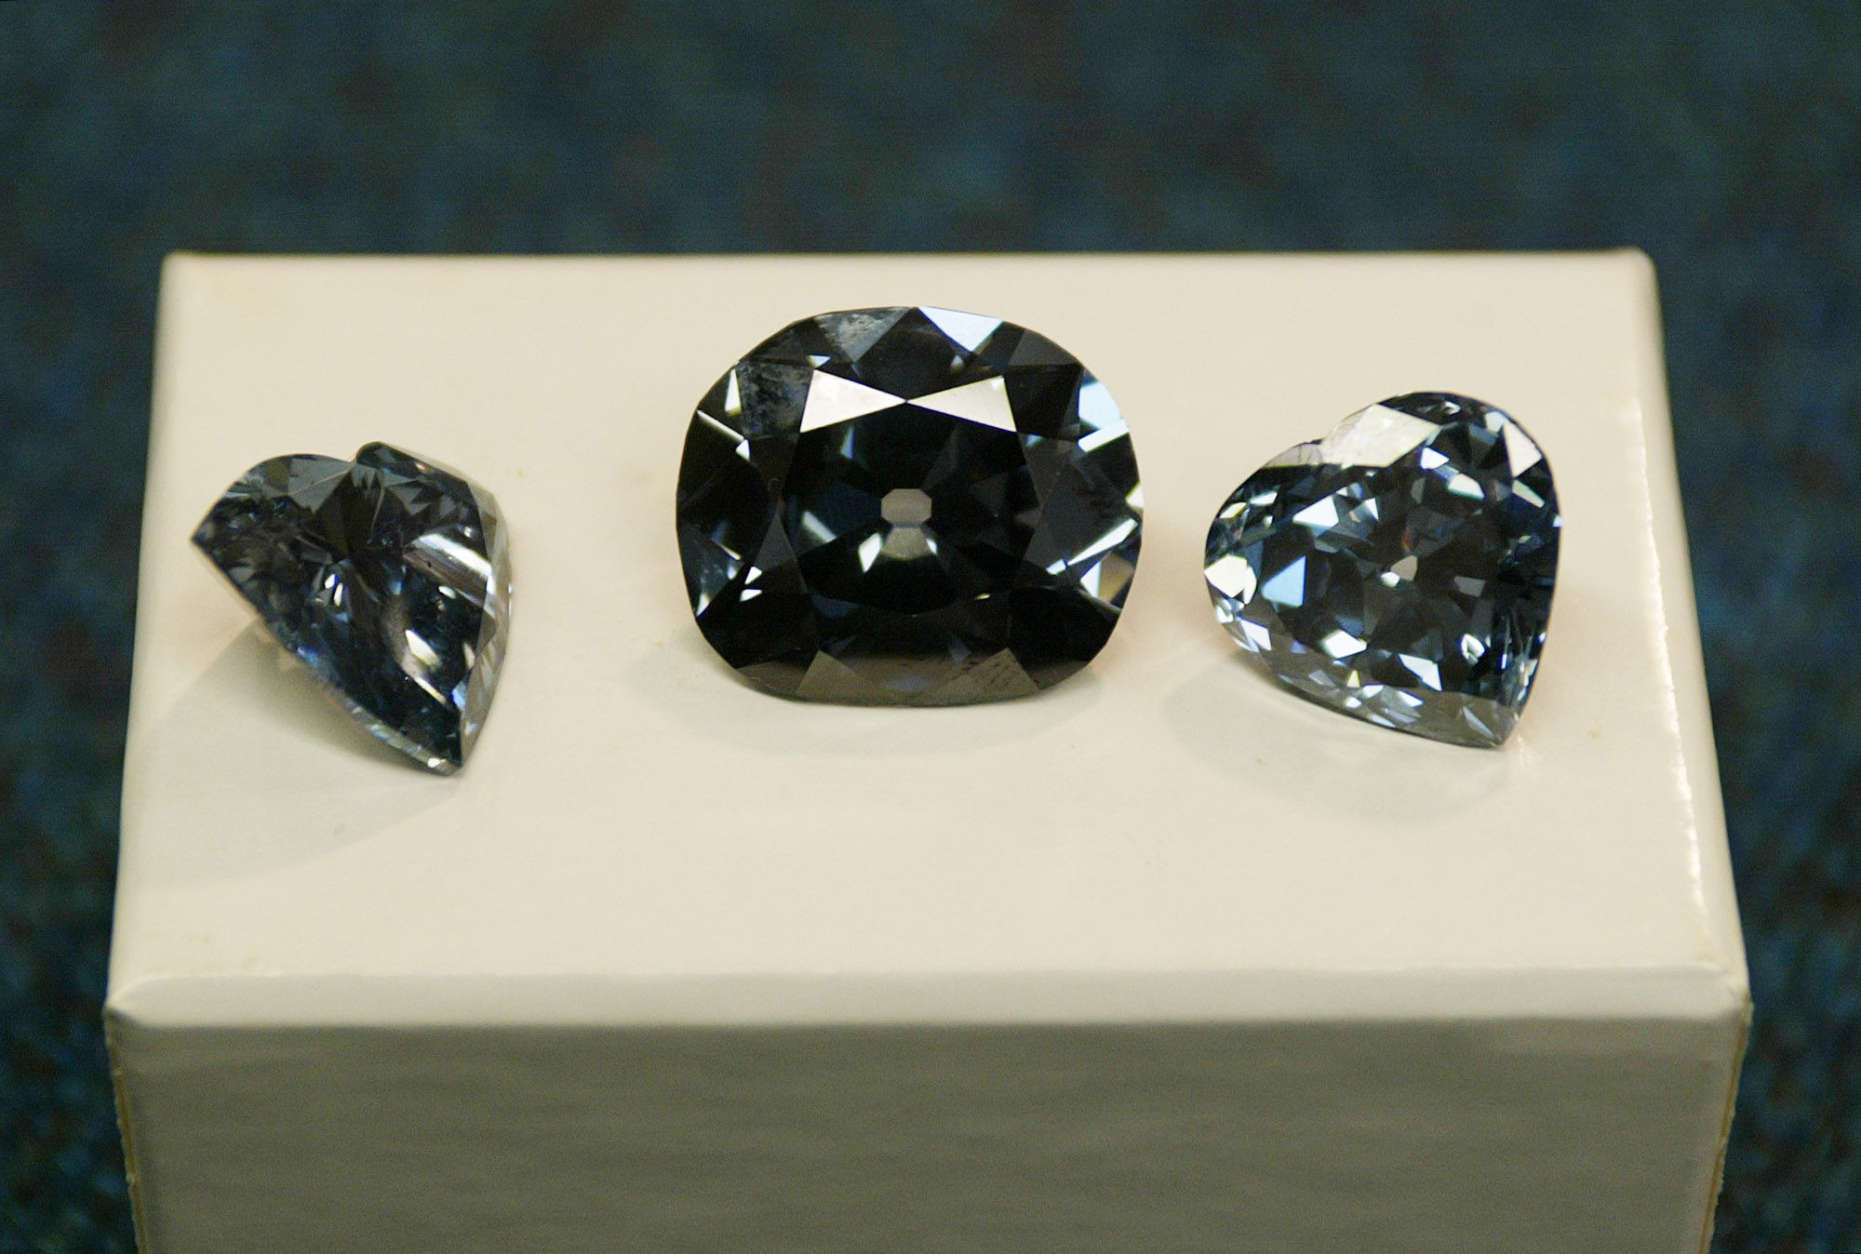 Replicas Show What Famed Hope Diamond Looked Like In 17th Century